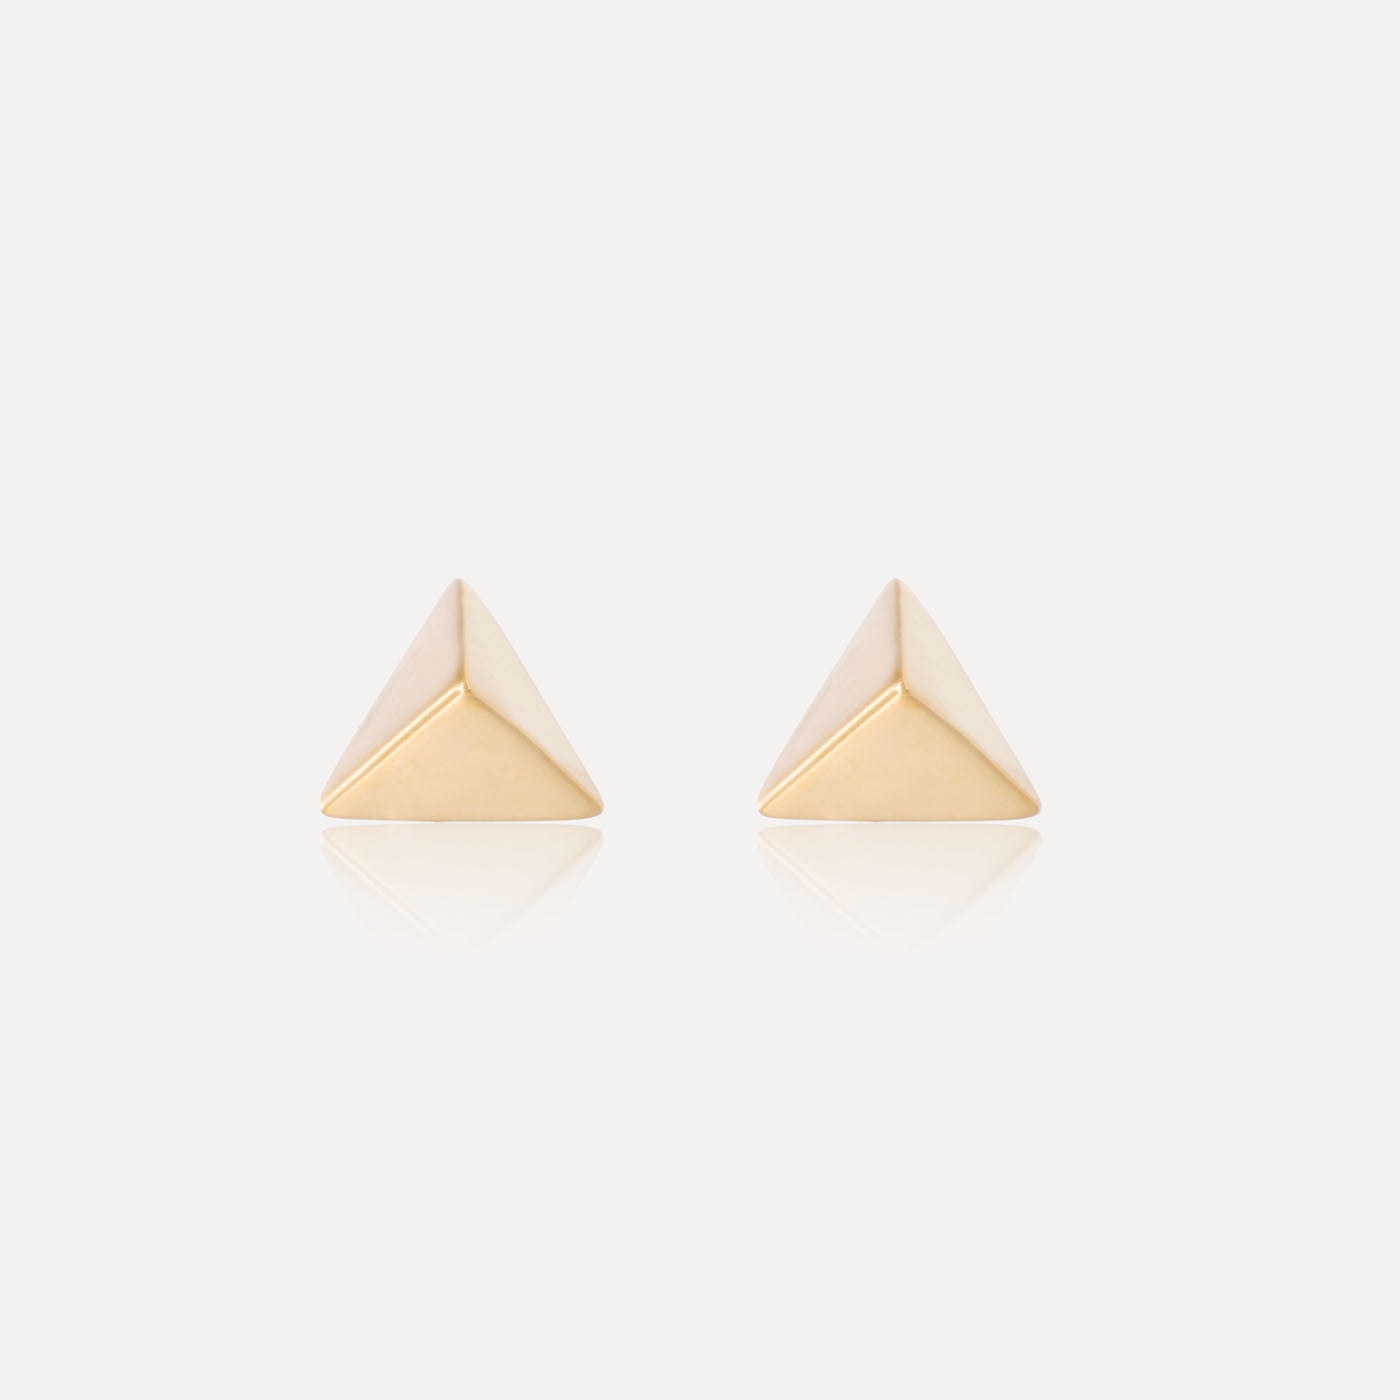 Melorra Pretty Pyramids Gold Earrings Yellow Gold 18kt Stud Earring Price  in India  Buy Melorra Pretty Pyramids Gold Earrings Yellow Gold 18kt Stud  Earring online at Flipkartcom